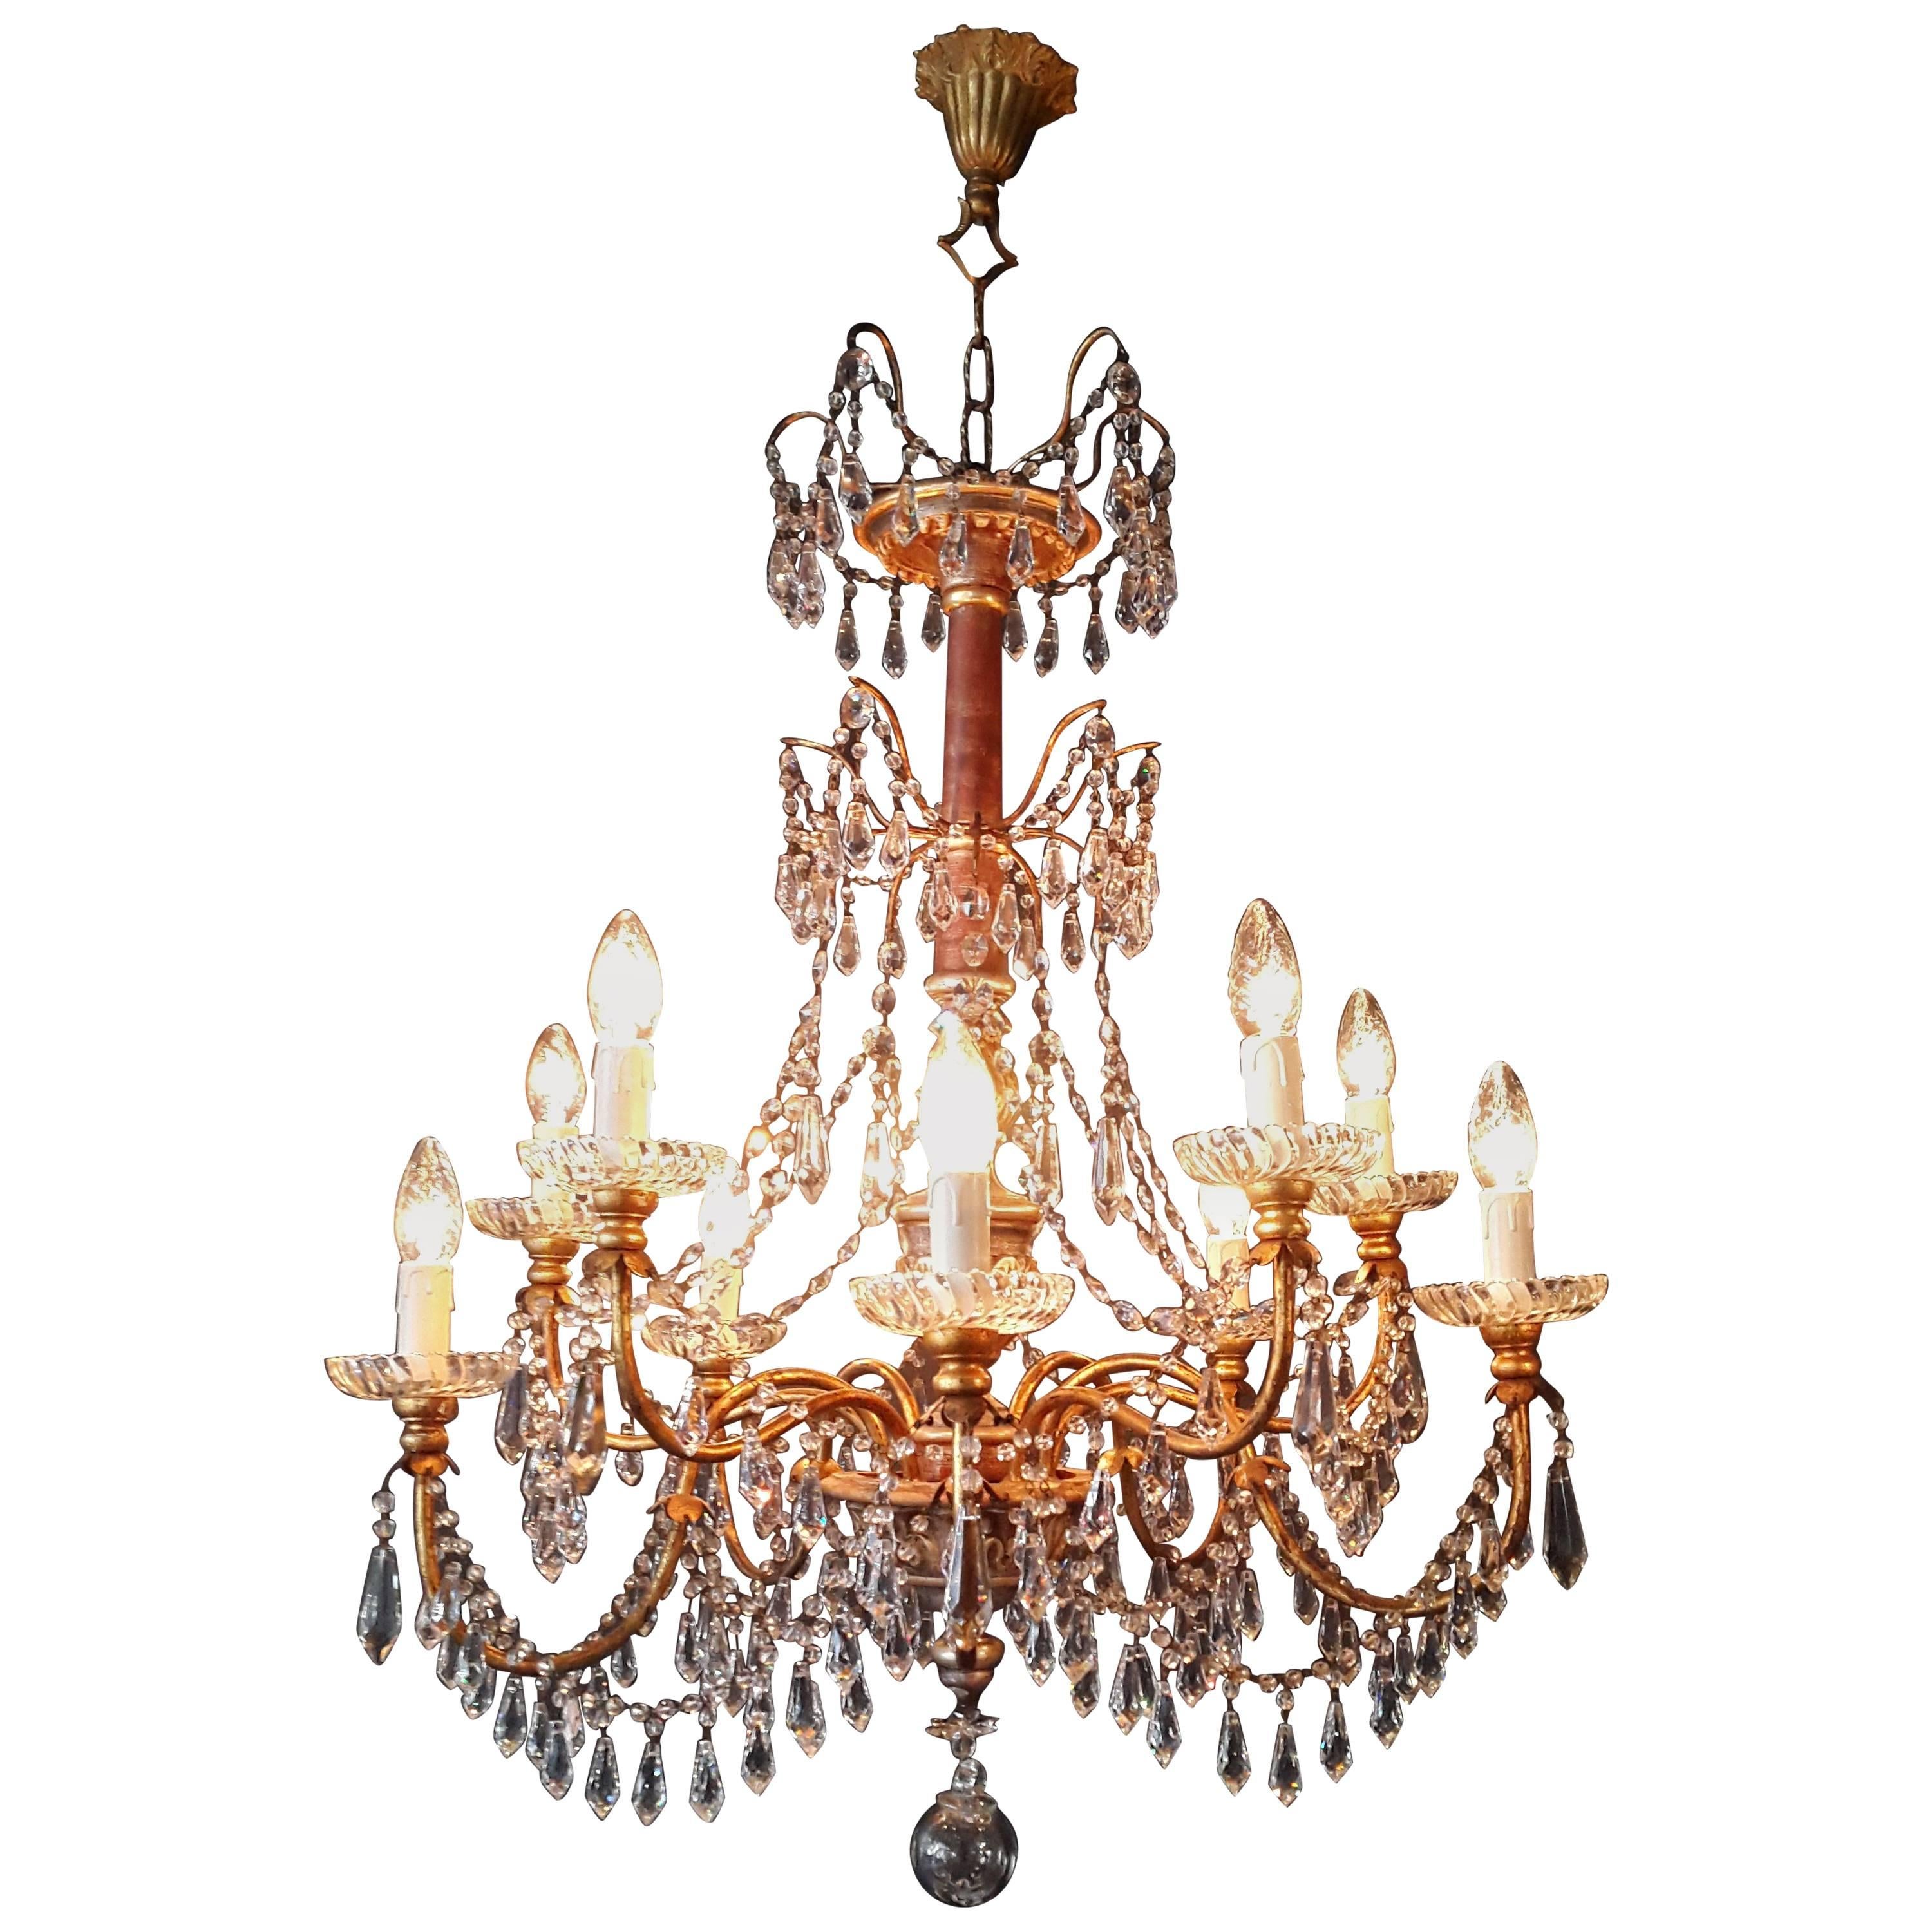 Antique Crystal Chandelier Lustre, 19th Century Wood